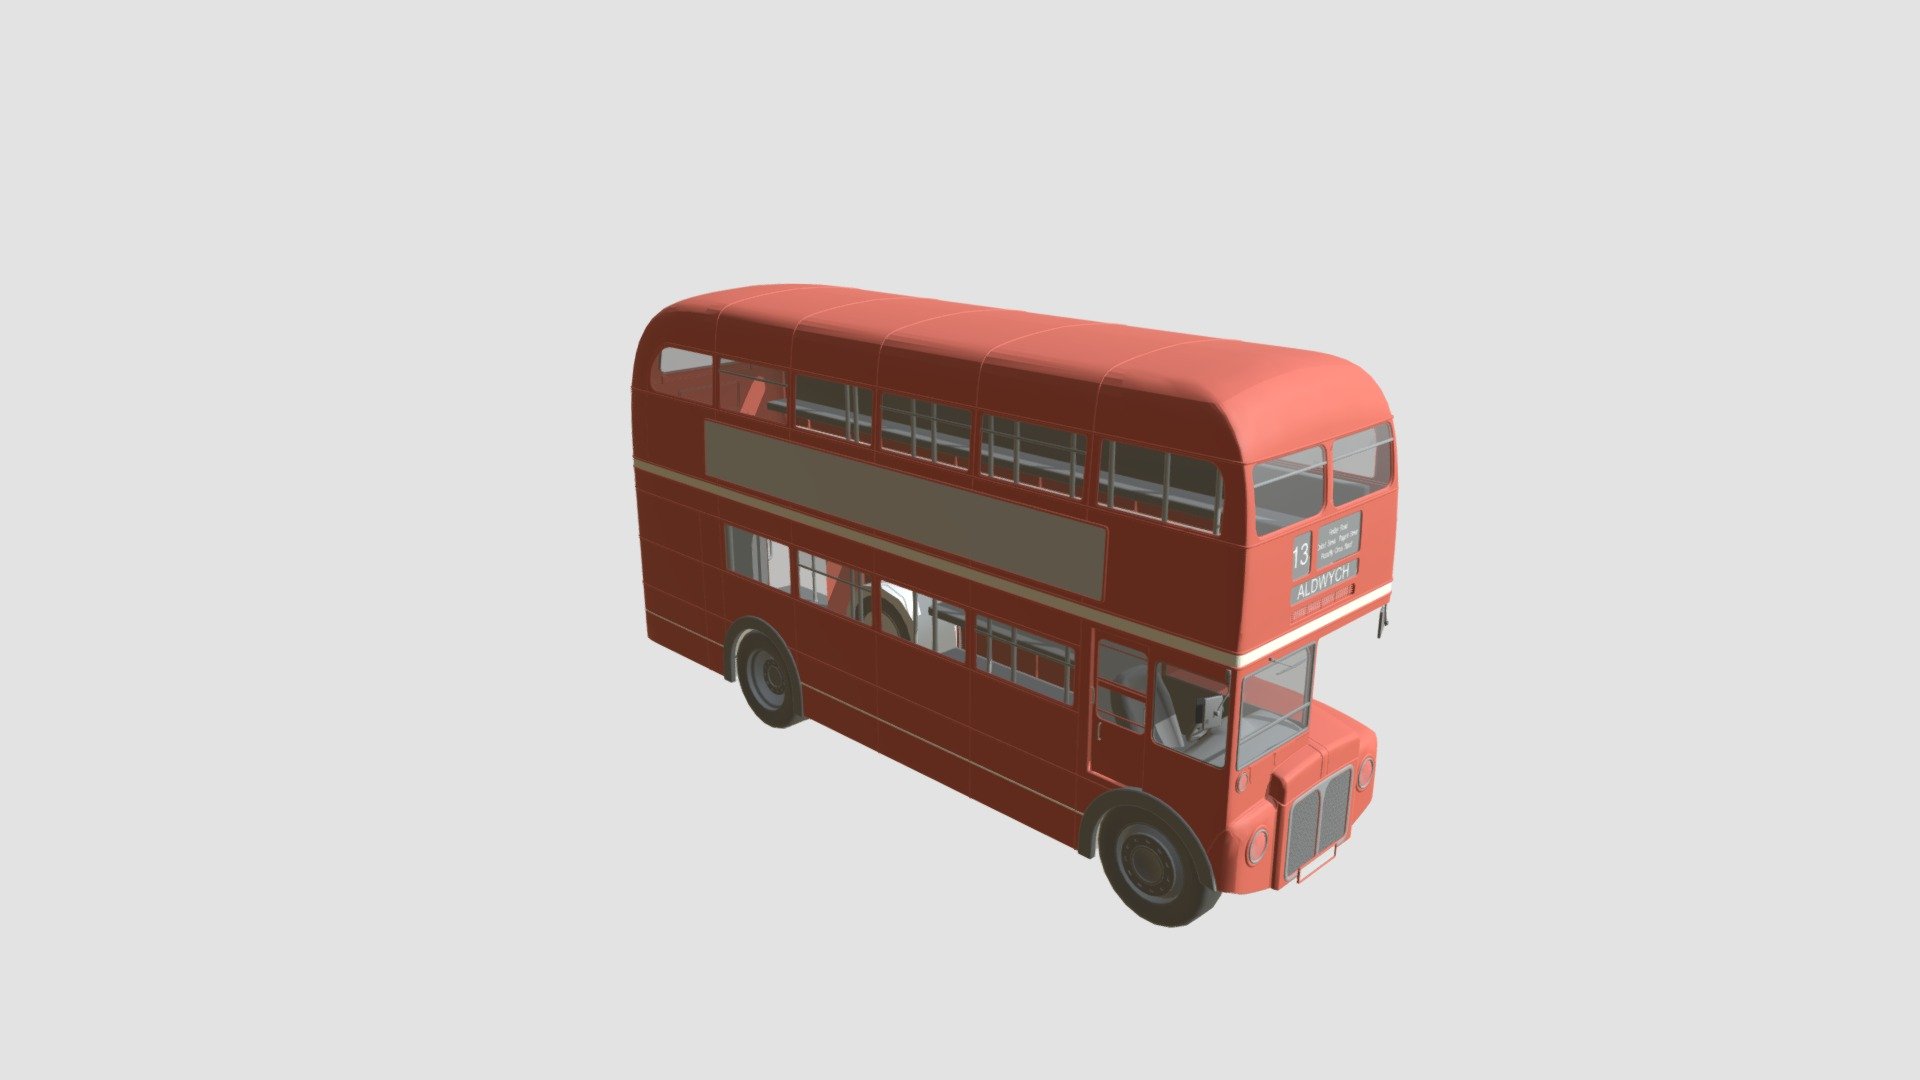 Highly detailed model of London bus with all textures, shaders and materials. It is ready to use, just put it into your scene 3d model